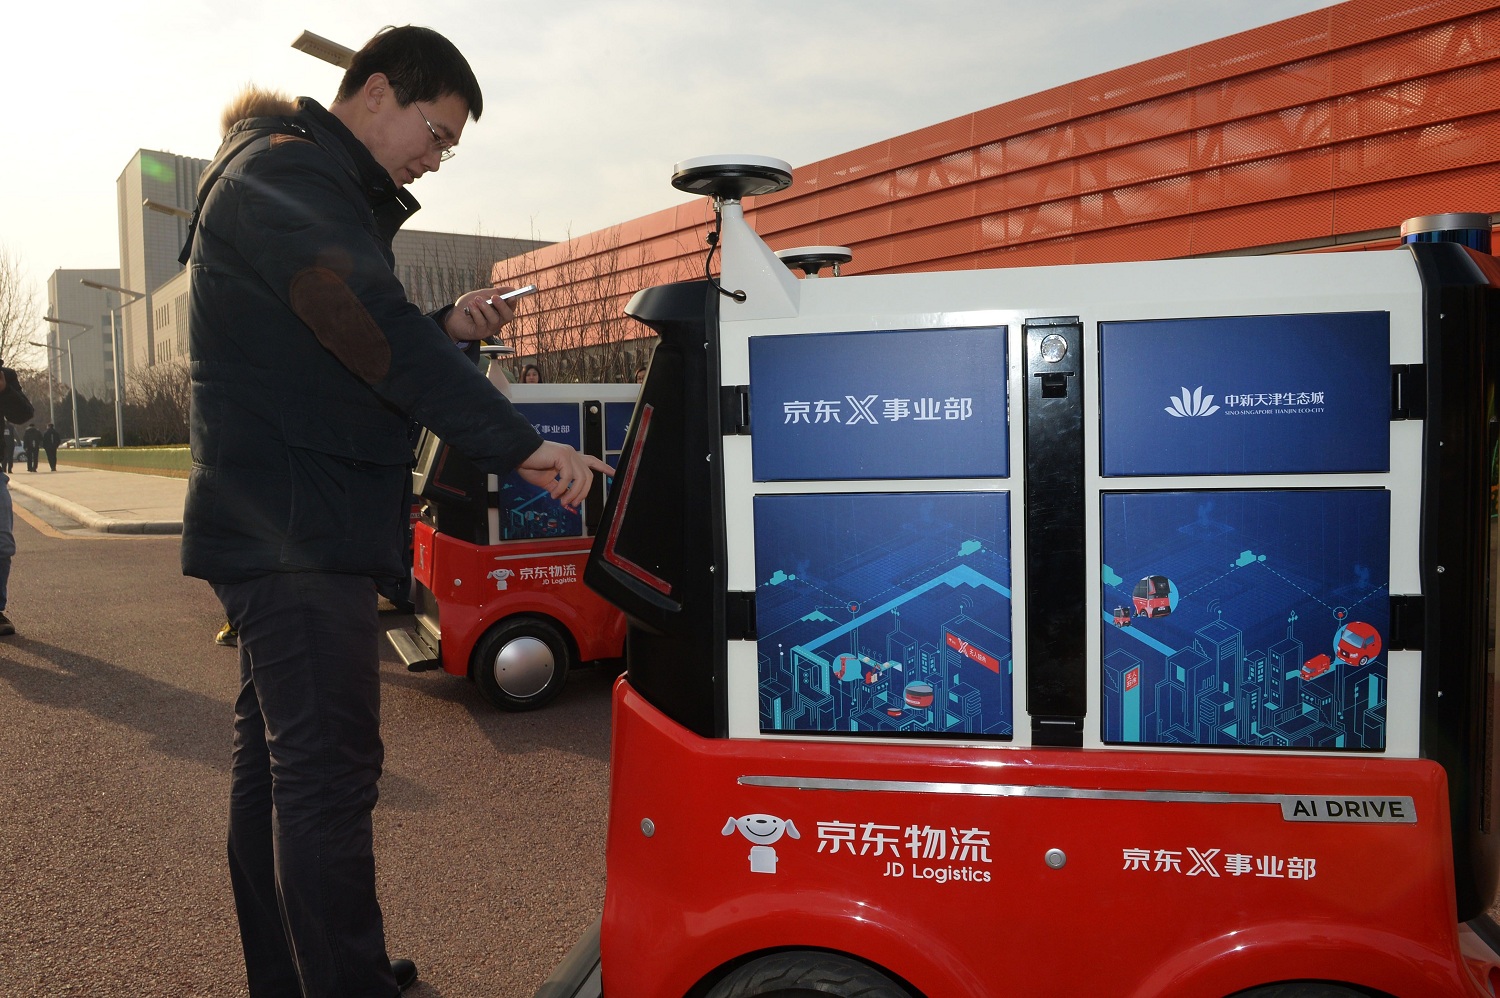 A driverless delivery vehicle being tested by Chinese e commerce company JD.com in China. The company is looking to expand its technology to Hong Kongs retail market beginning with unstaffed stores